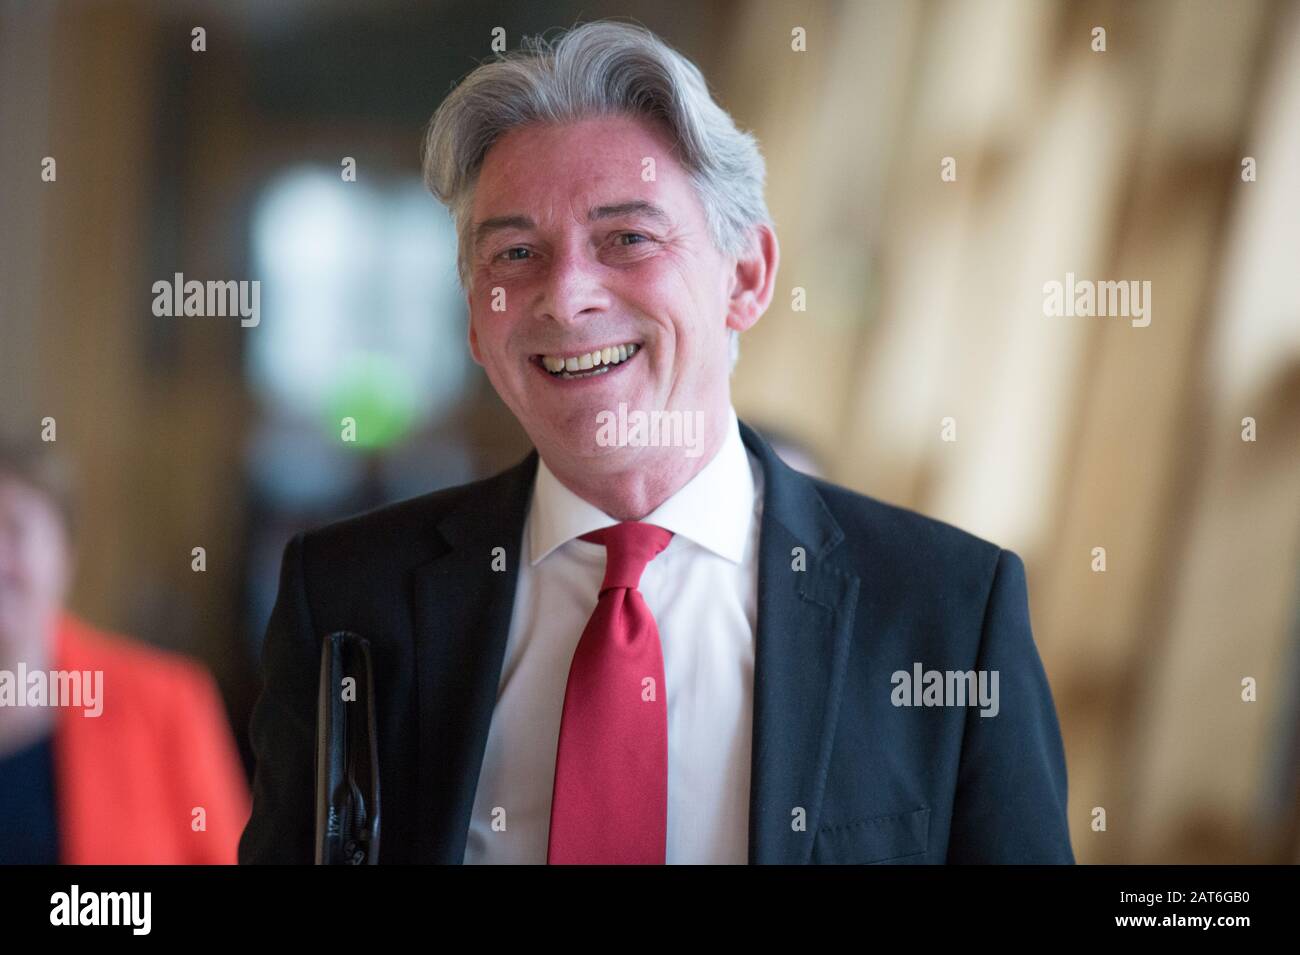 Edinburgh, UK. 30 January 2020.   Pictured: Richard Leonard MSP - Leader of the Scottish Labour Party. The last First Ministers Questions at the Scottish Parliament before the UK leaves the EU, and on the day after which Holyrood voted to hold its second independence referendum, the chamber today had some heated exchanges.  Credit: Colin Fisher/Alamy Live News. Stock Photo